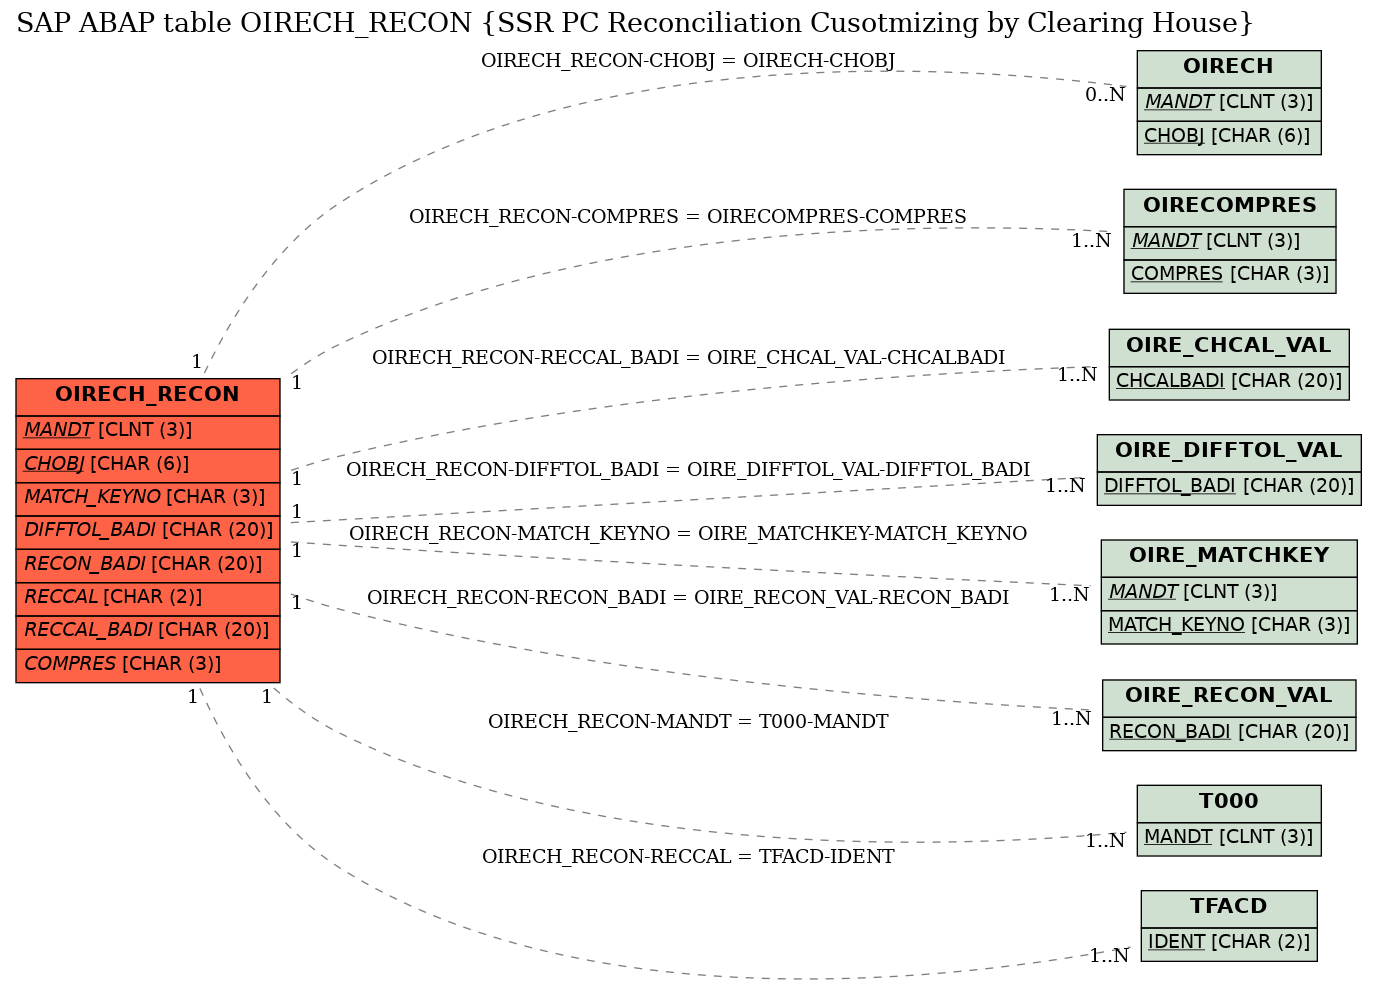 E-R Diagram for table OIRECH_RECON (SSR PC Reconciliation Cusotmizing by Clearing House)